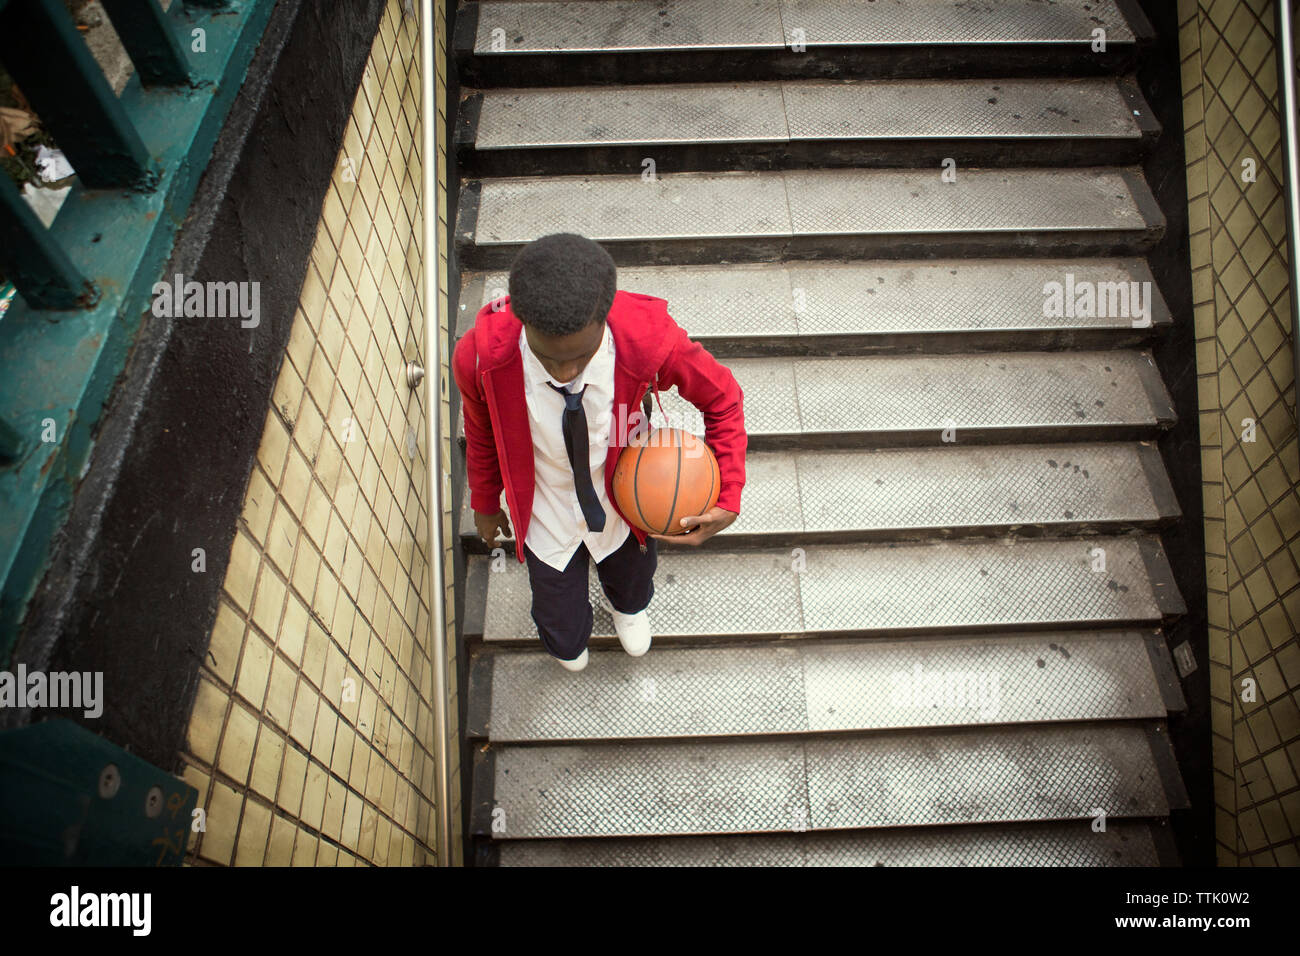 High angle view of student holding basketball walking down steps Banque D'Images